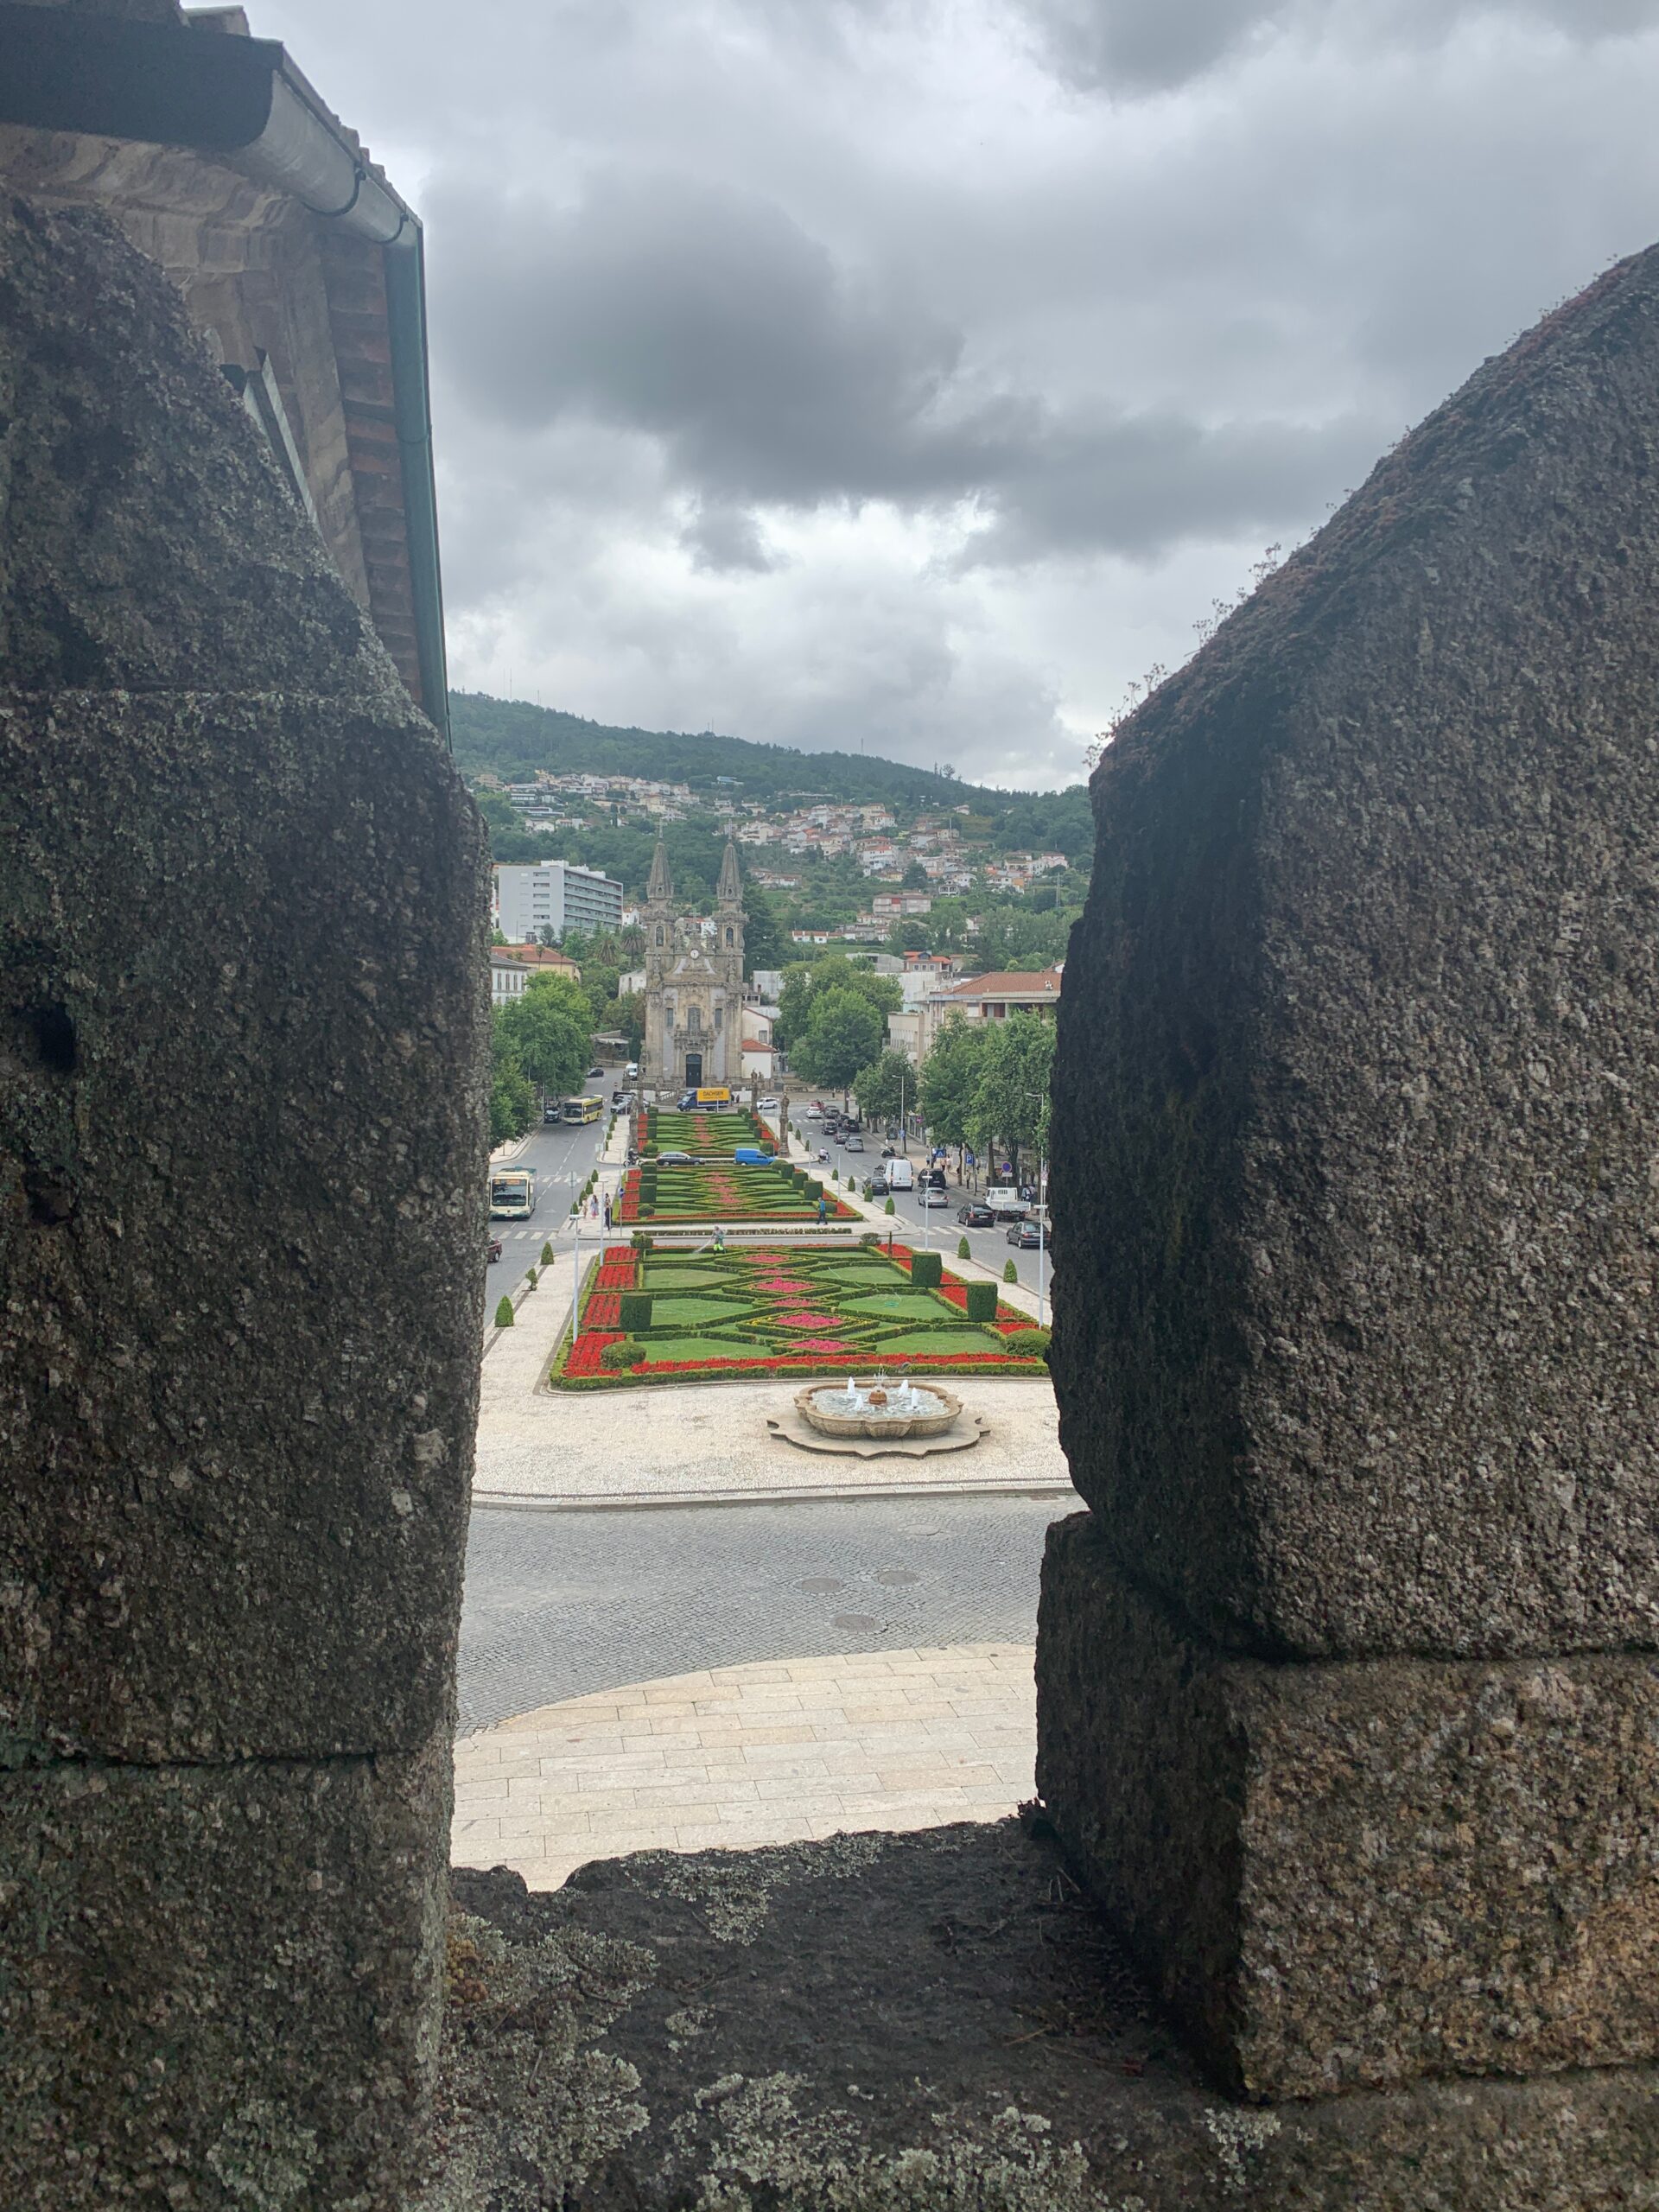 View from the rampart of the city wall.